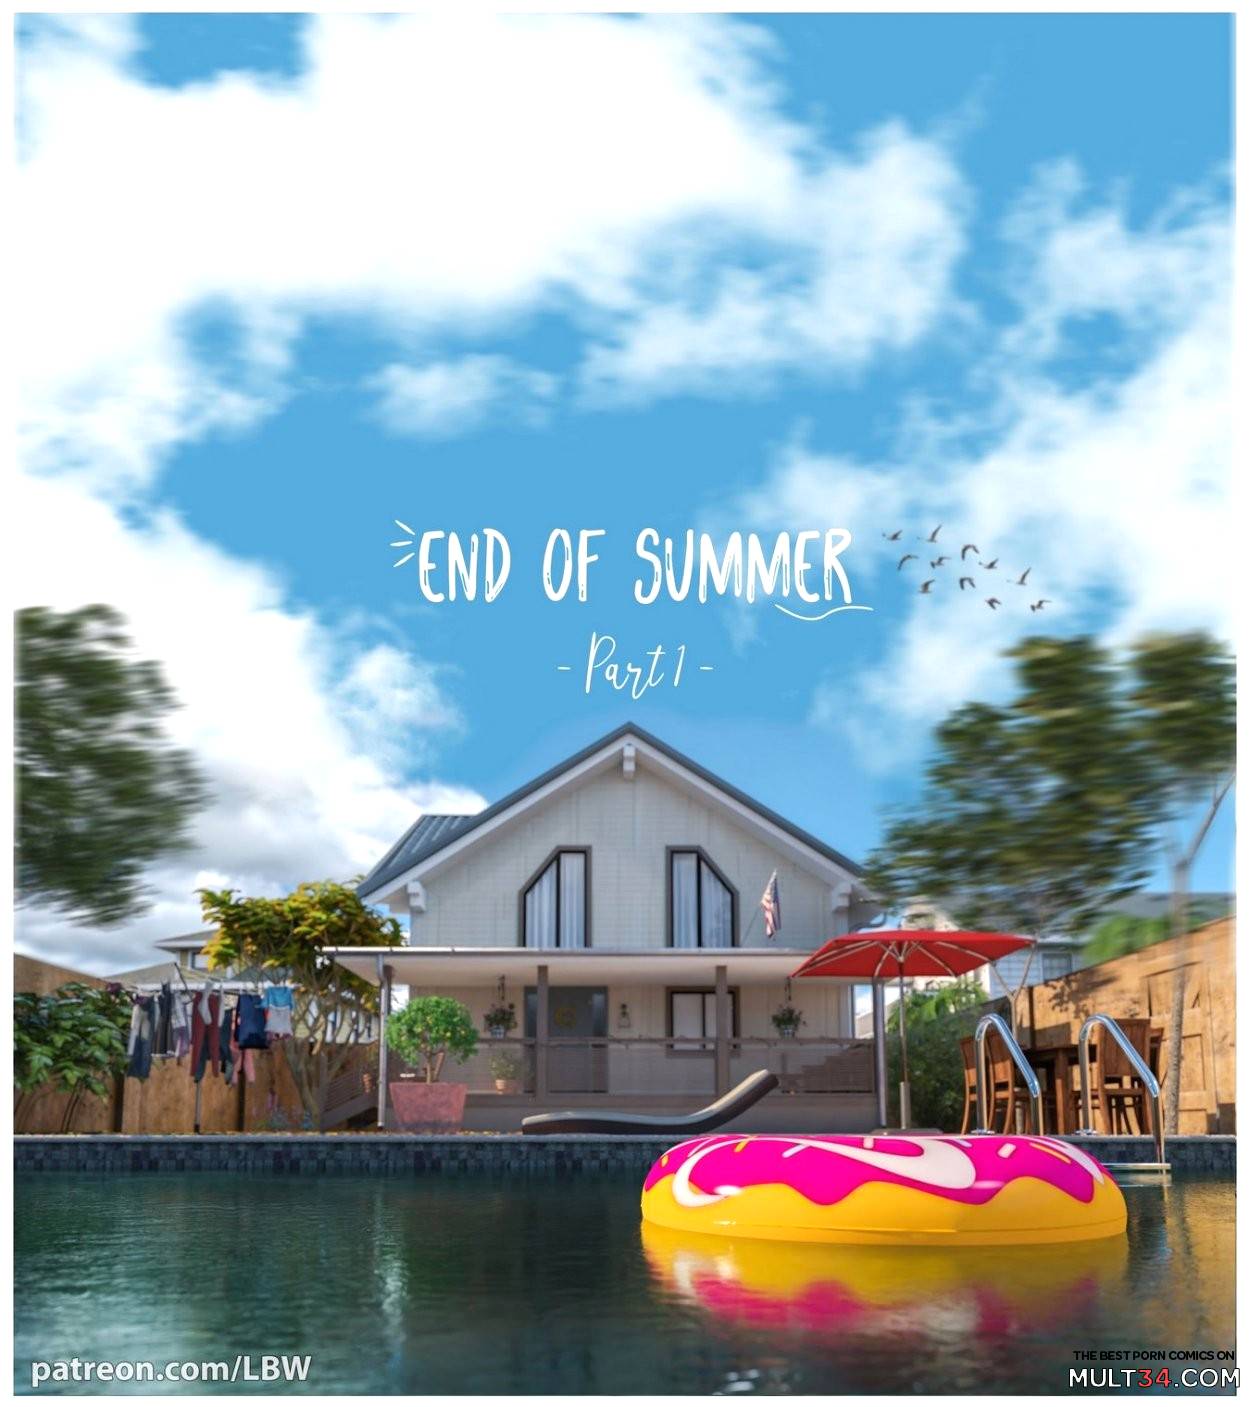 End Of Summer page 1